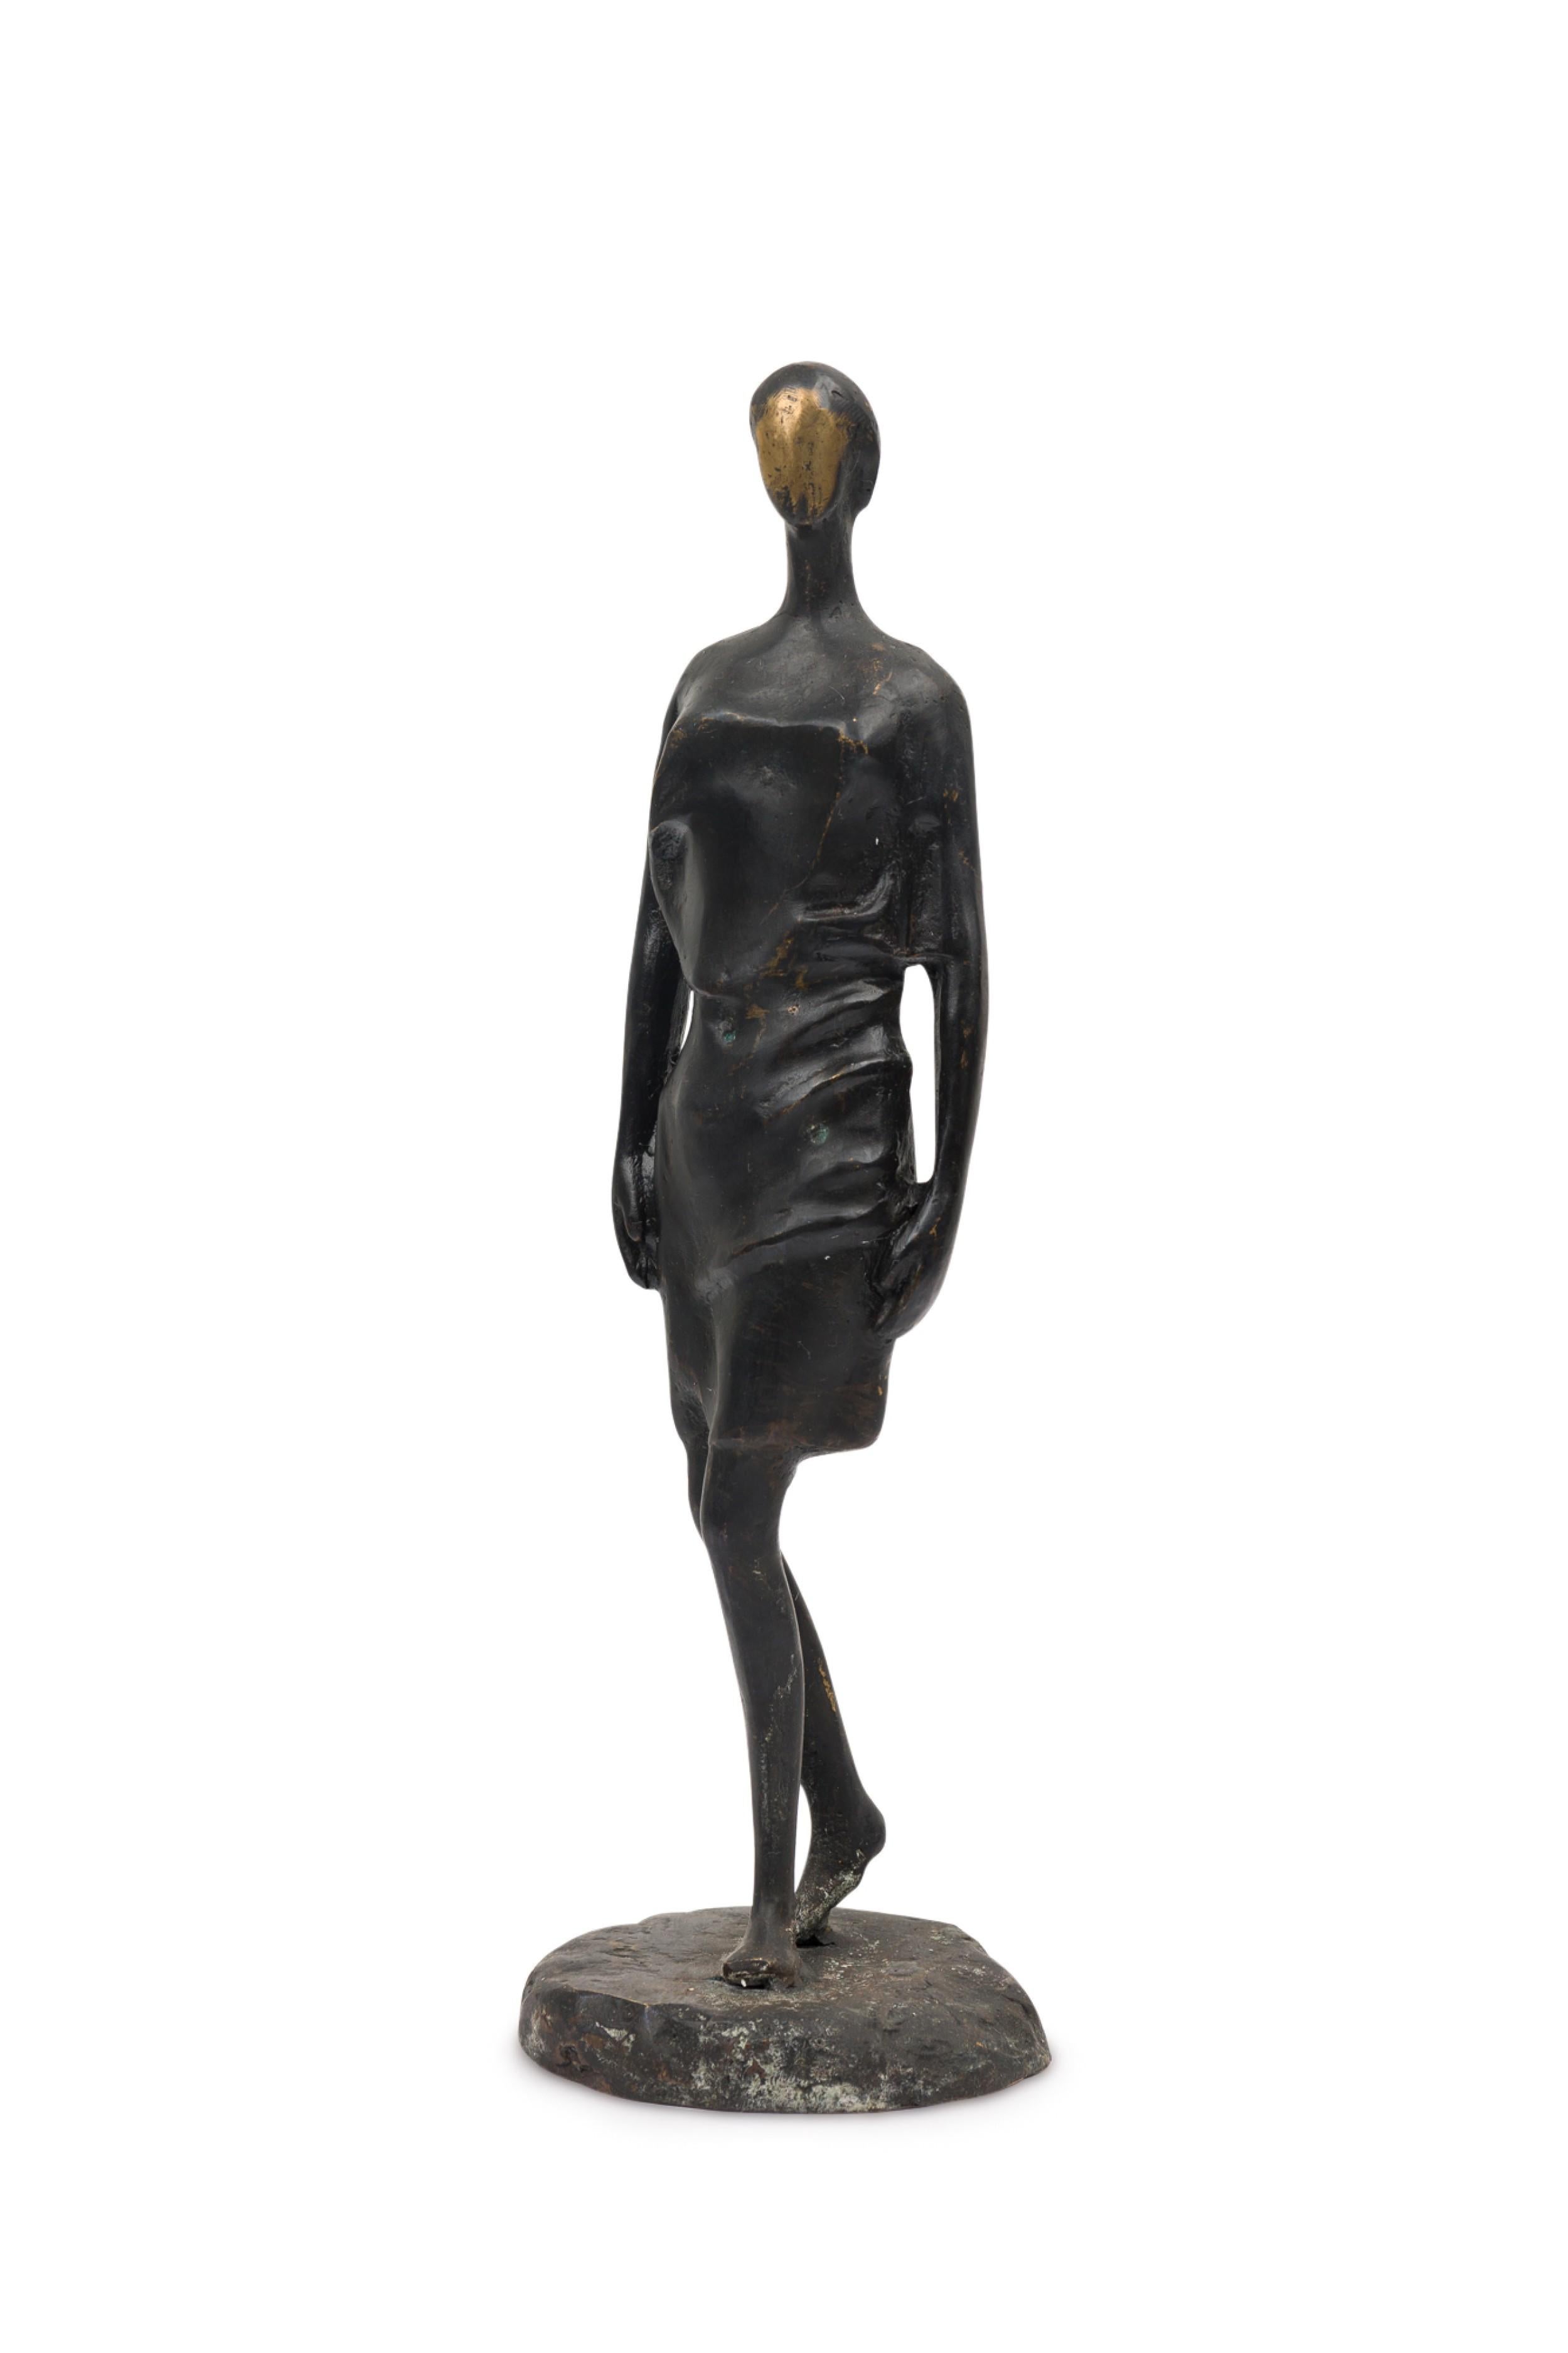 Contemporary hand-forged bronze Brutalist-inspired figural sculpture depicting a female walking figure finished in an ebonized patina. (PRICED EACH) (